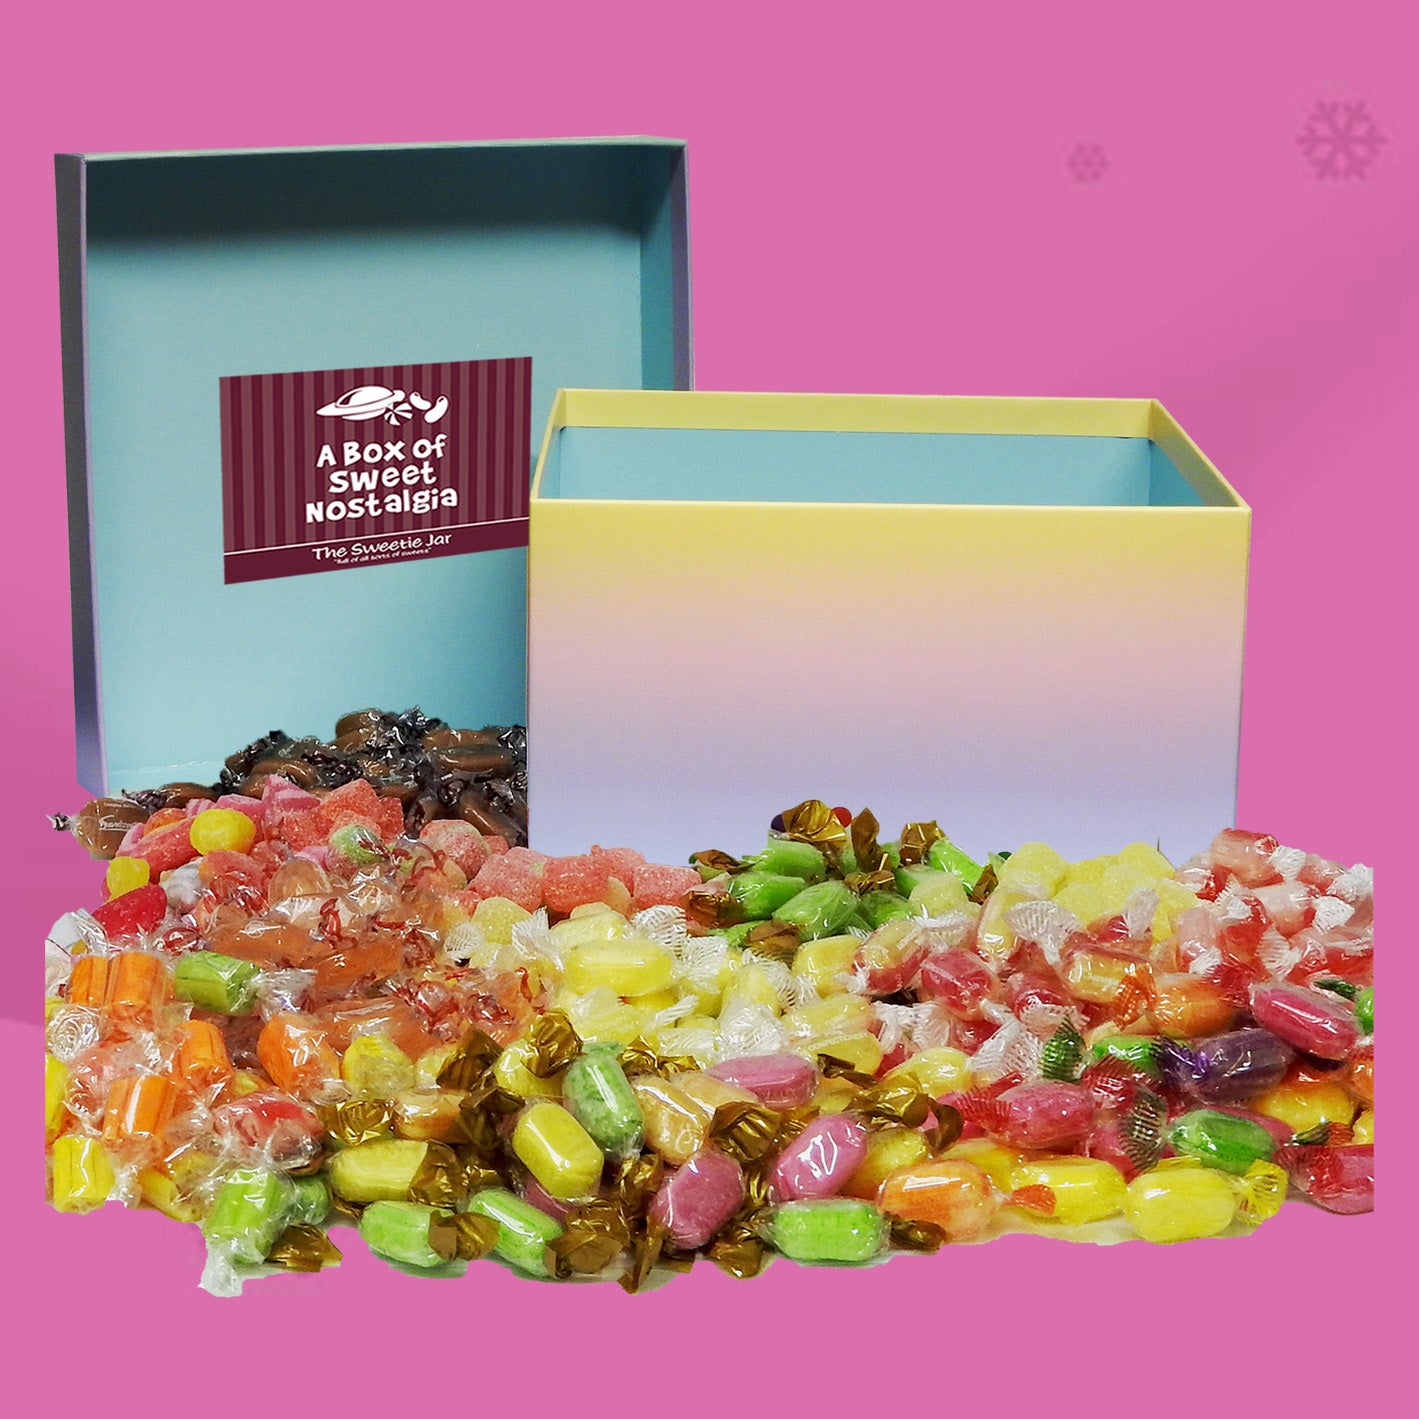 Retro Sweet Gift Boxes with a mix of all those old fashioned childhood sweets everyone remembers!